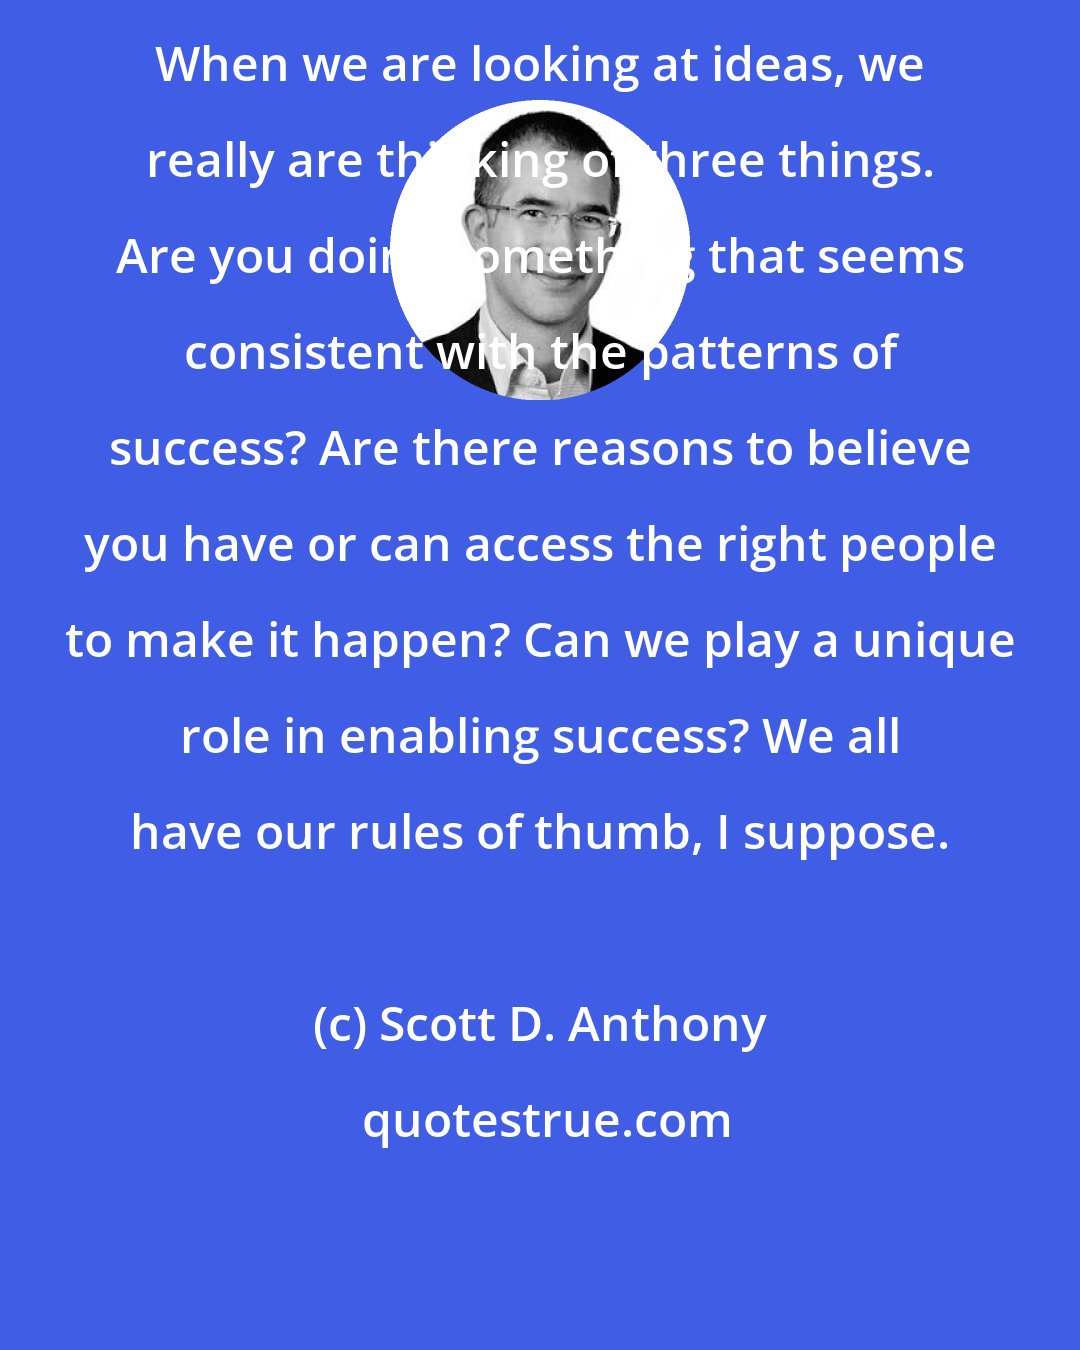 Scott D. Anthony: When we are looking at ideas, we really are thinking of three things. Are you doing something that seems consistent with the patterns of success? Are there reasons to believe you have or can access the right people to make it happen? Can we play a unique role in enabling success? We all have our rules of thumb, I suppose.